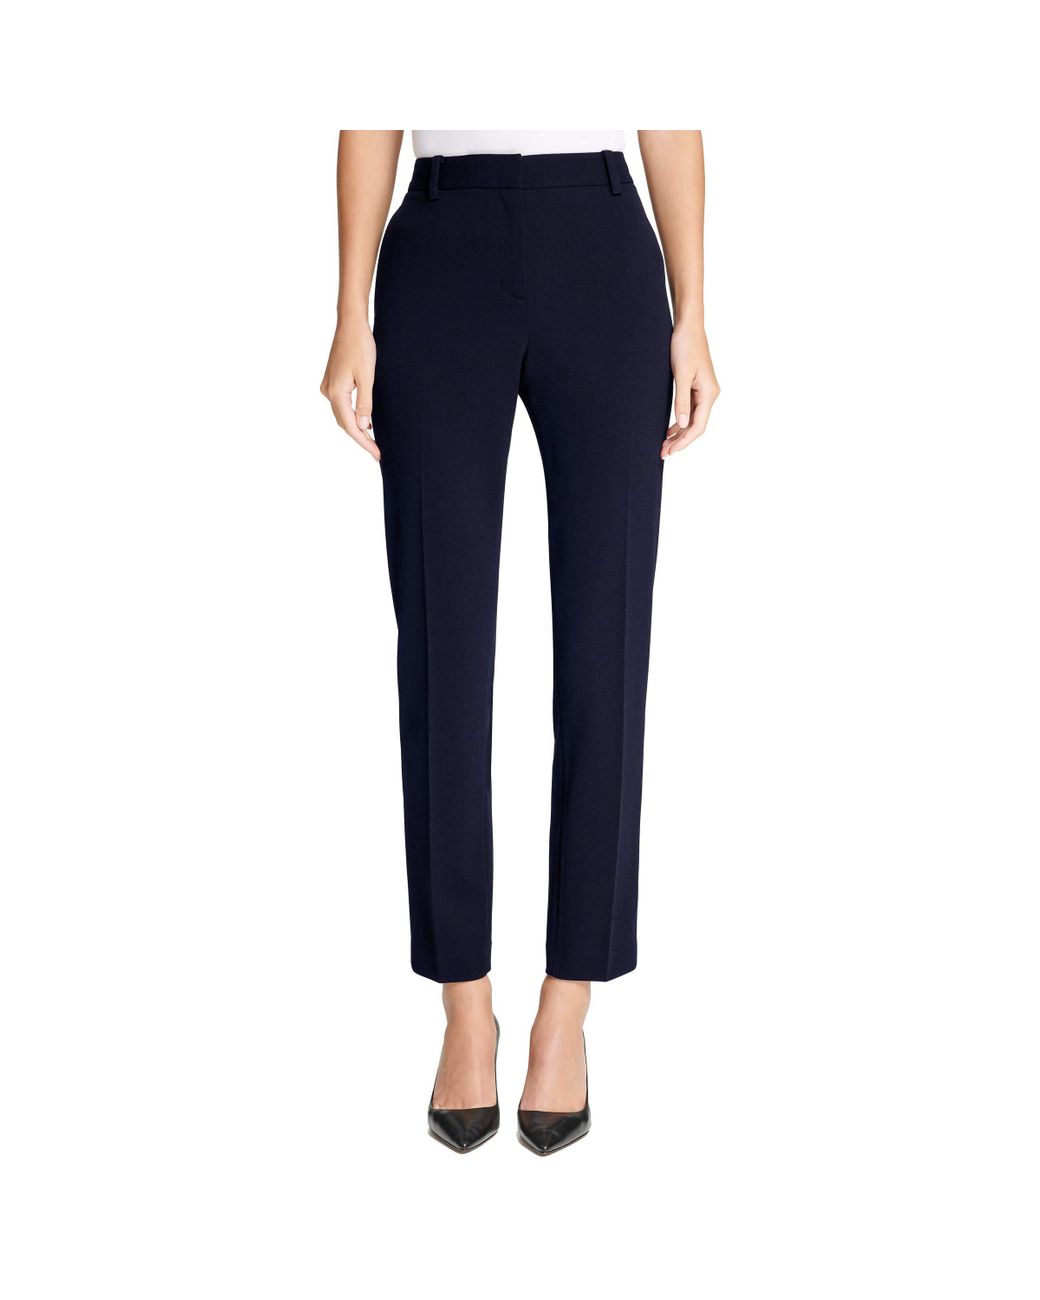 DKNY Misses Stretch Crepe Fixed Waist Skinny Pant in Blue - Lyst